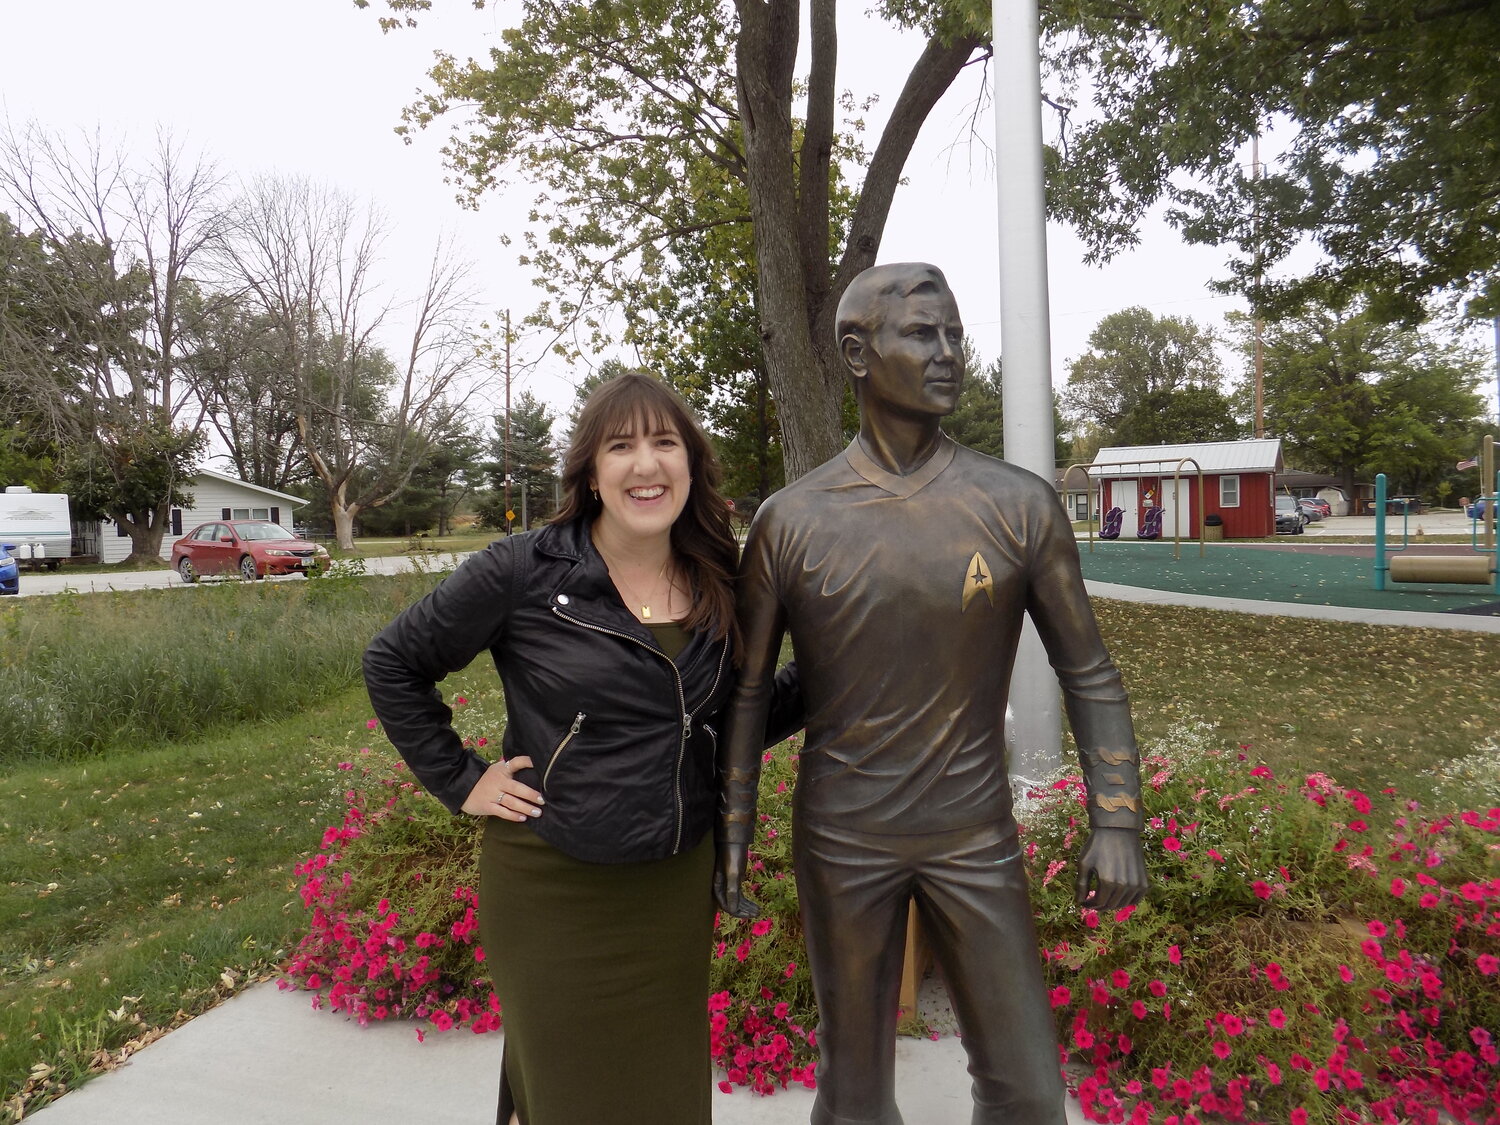 Author Megan Bannister, hanging out with Capt. Kirk in Riverside, one of the first weird places she discovered after moving to Iowa.